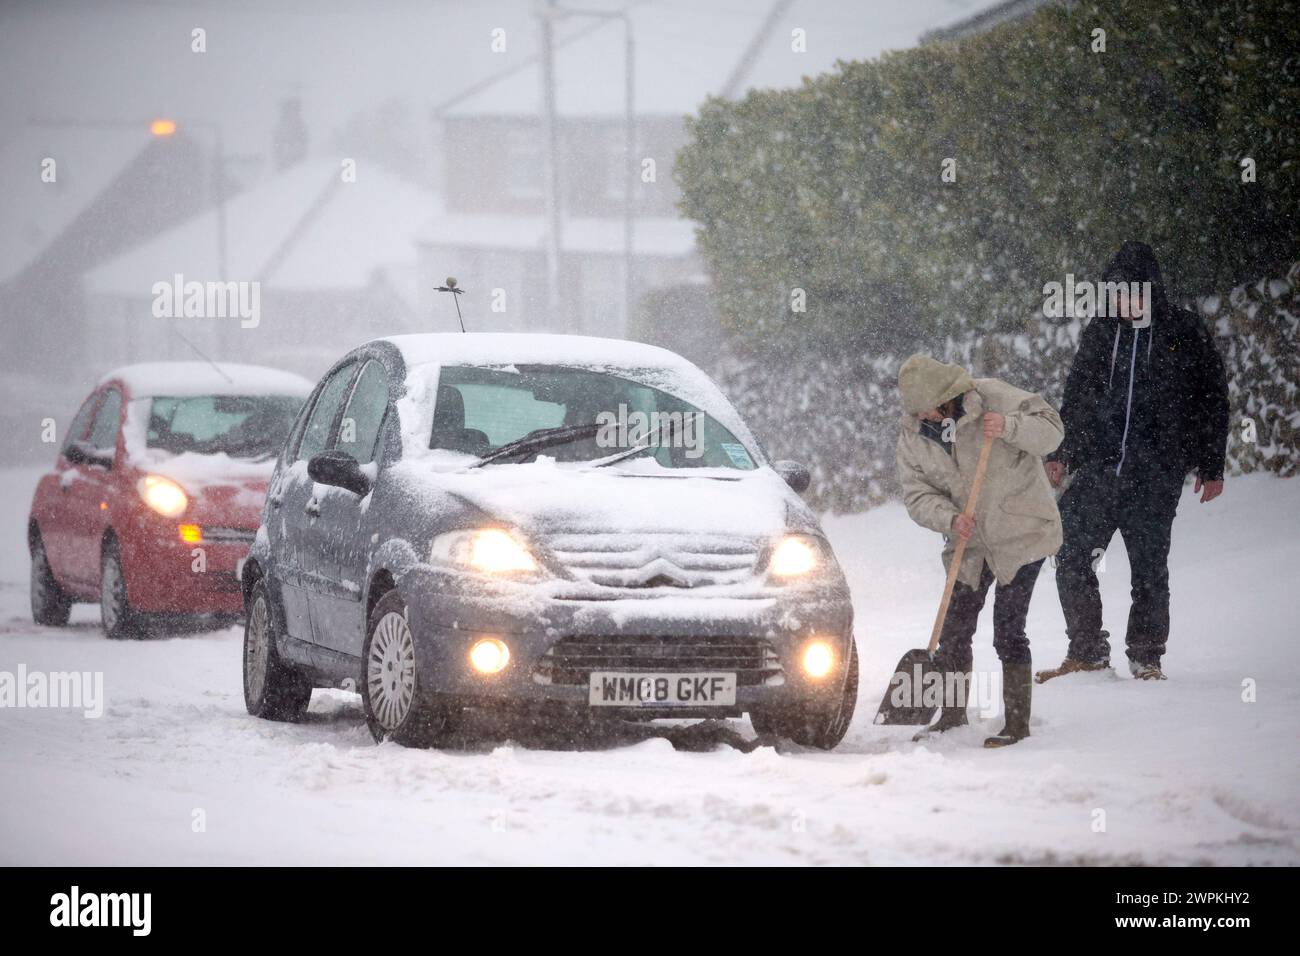 29/01/15  Heavy snowfall results in multiple accidents, stranded vehicles and traffic chaos as the wintery weather does its best to shut down theDerby Stock Photo